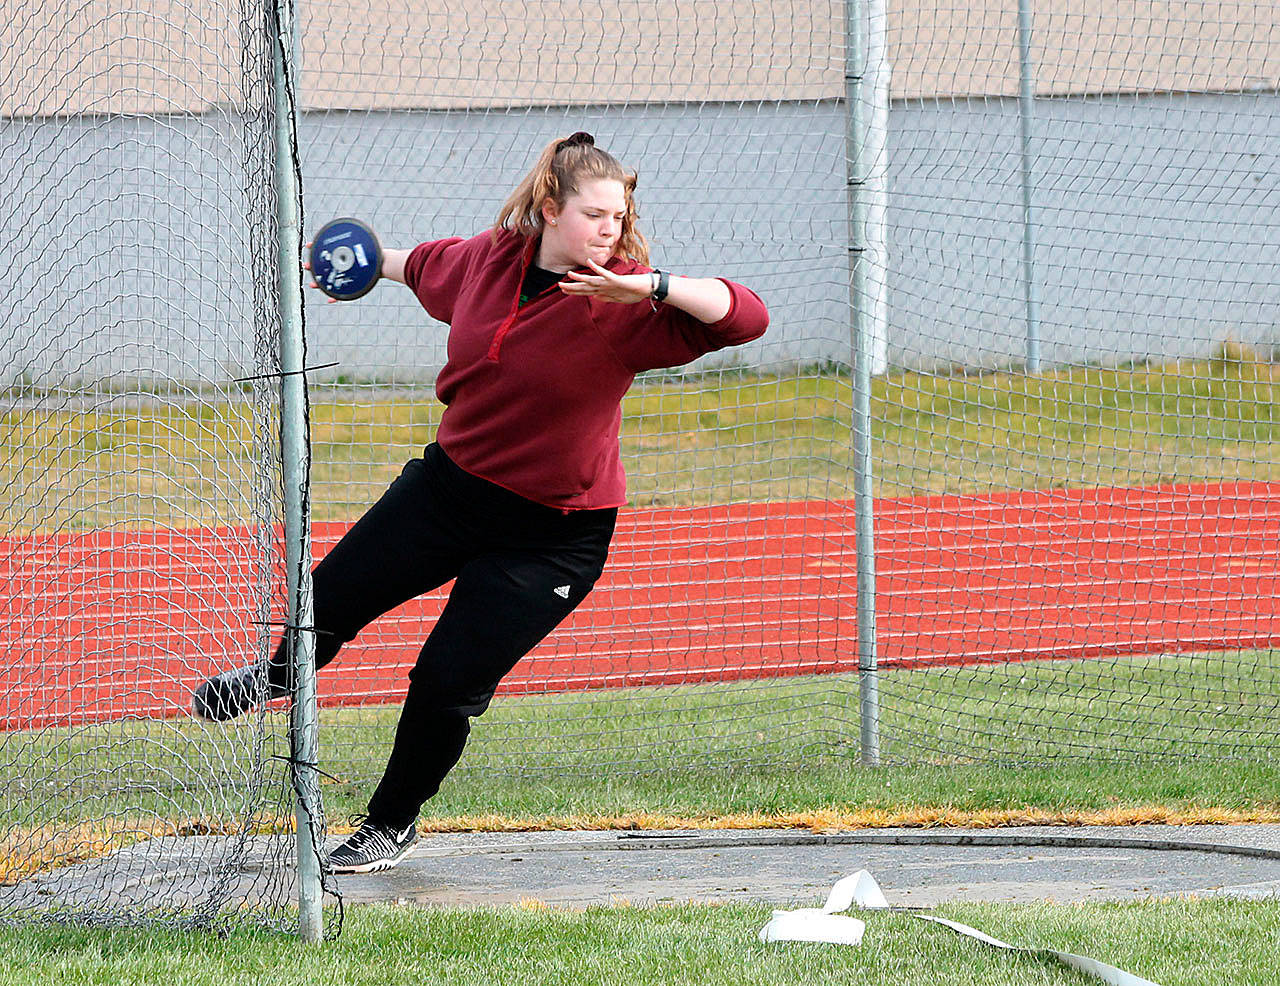 Mya Pratt gets ready to release the discus. (Photo by Jim Waller/South Whidbey Record)